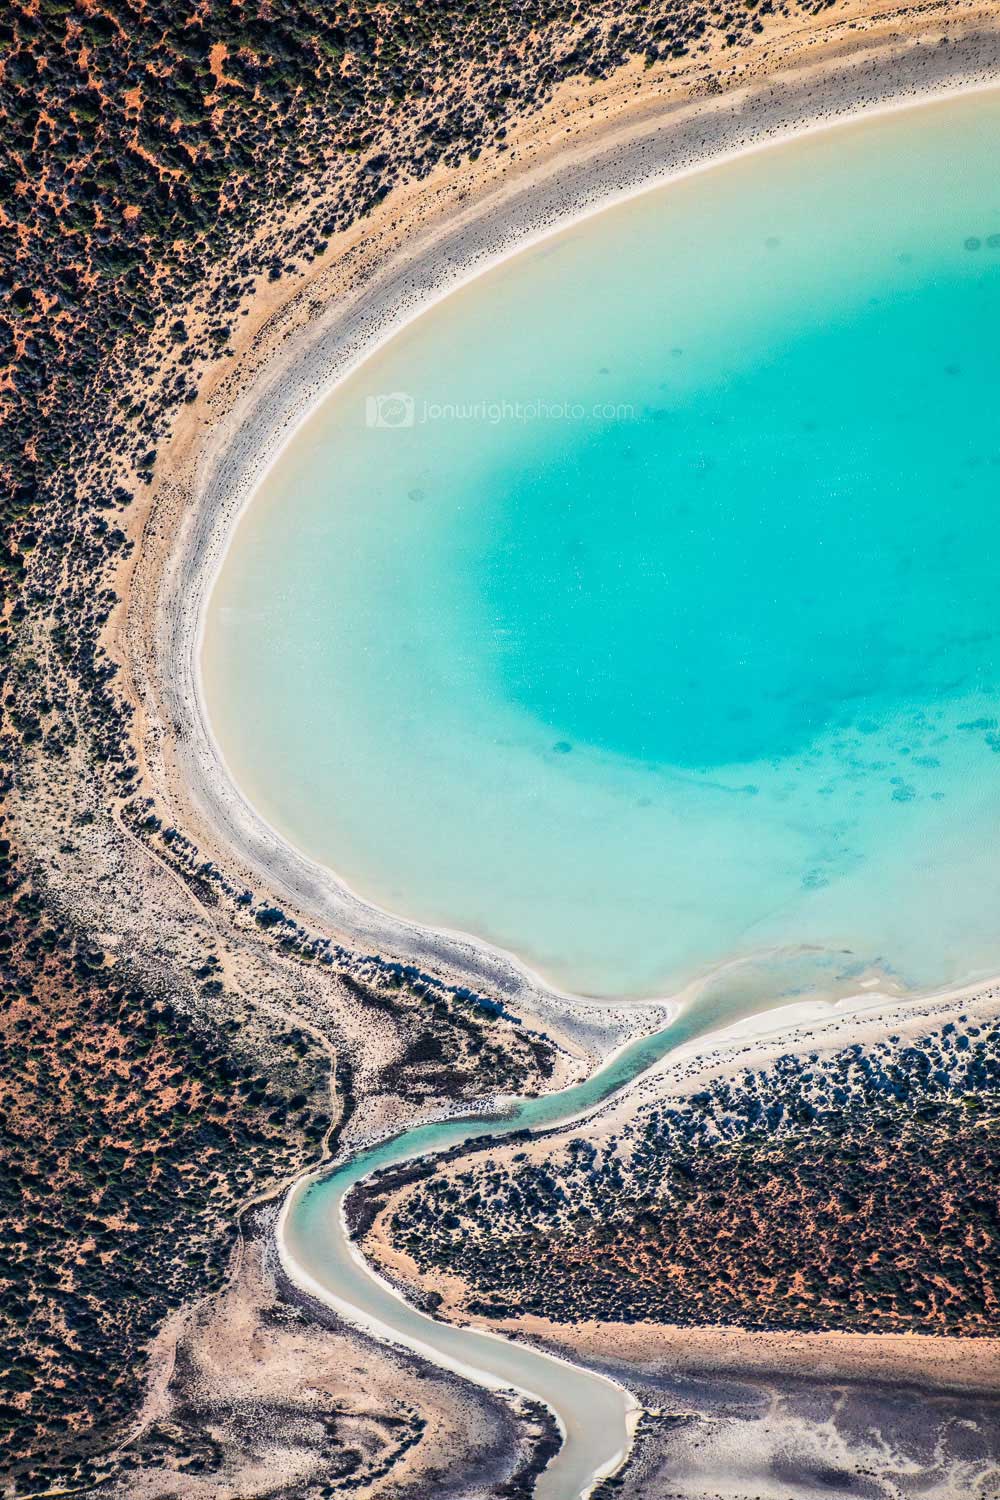 Aerial image of salt pond in Western Australia with blue and red sand